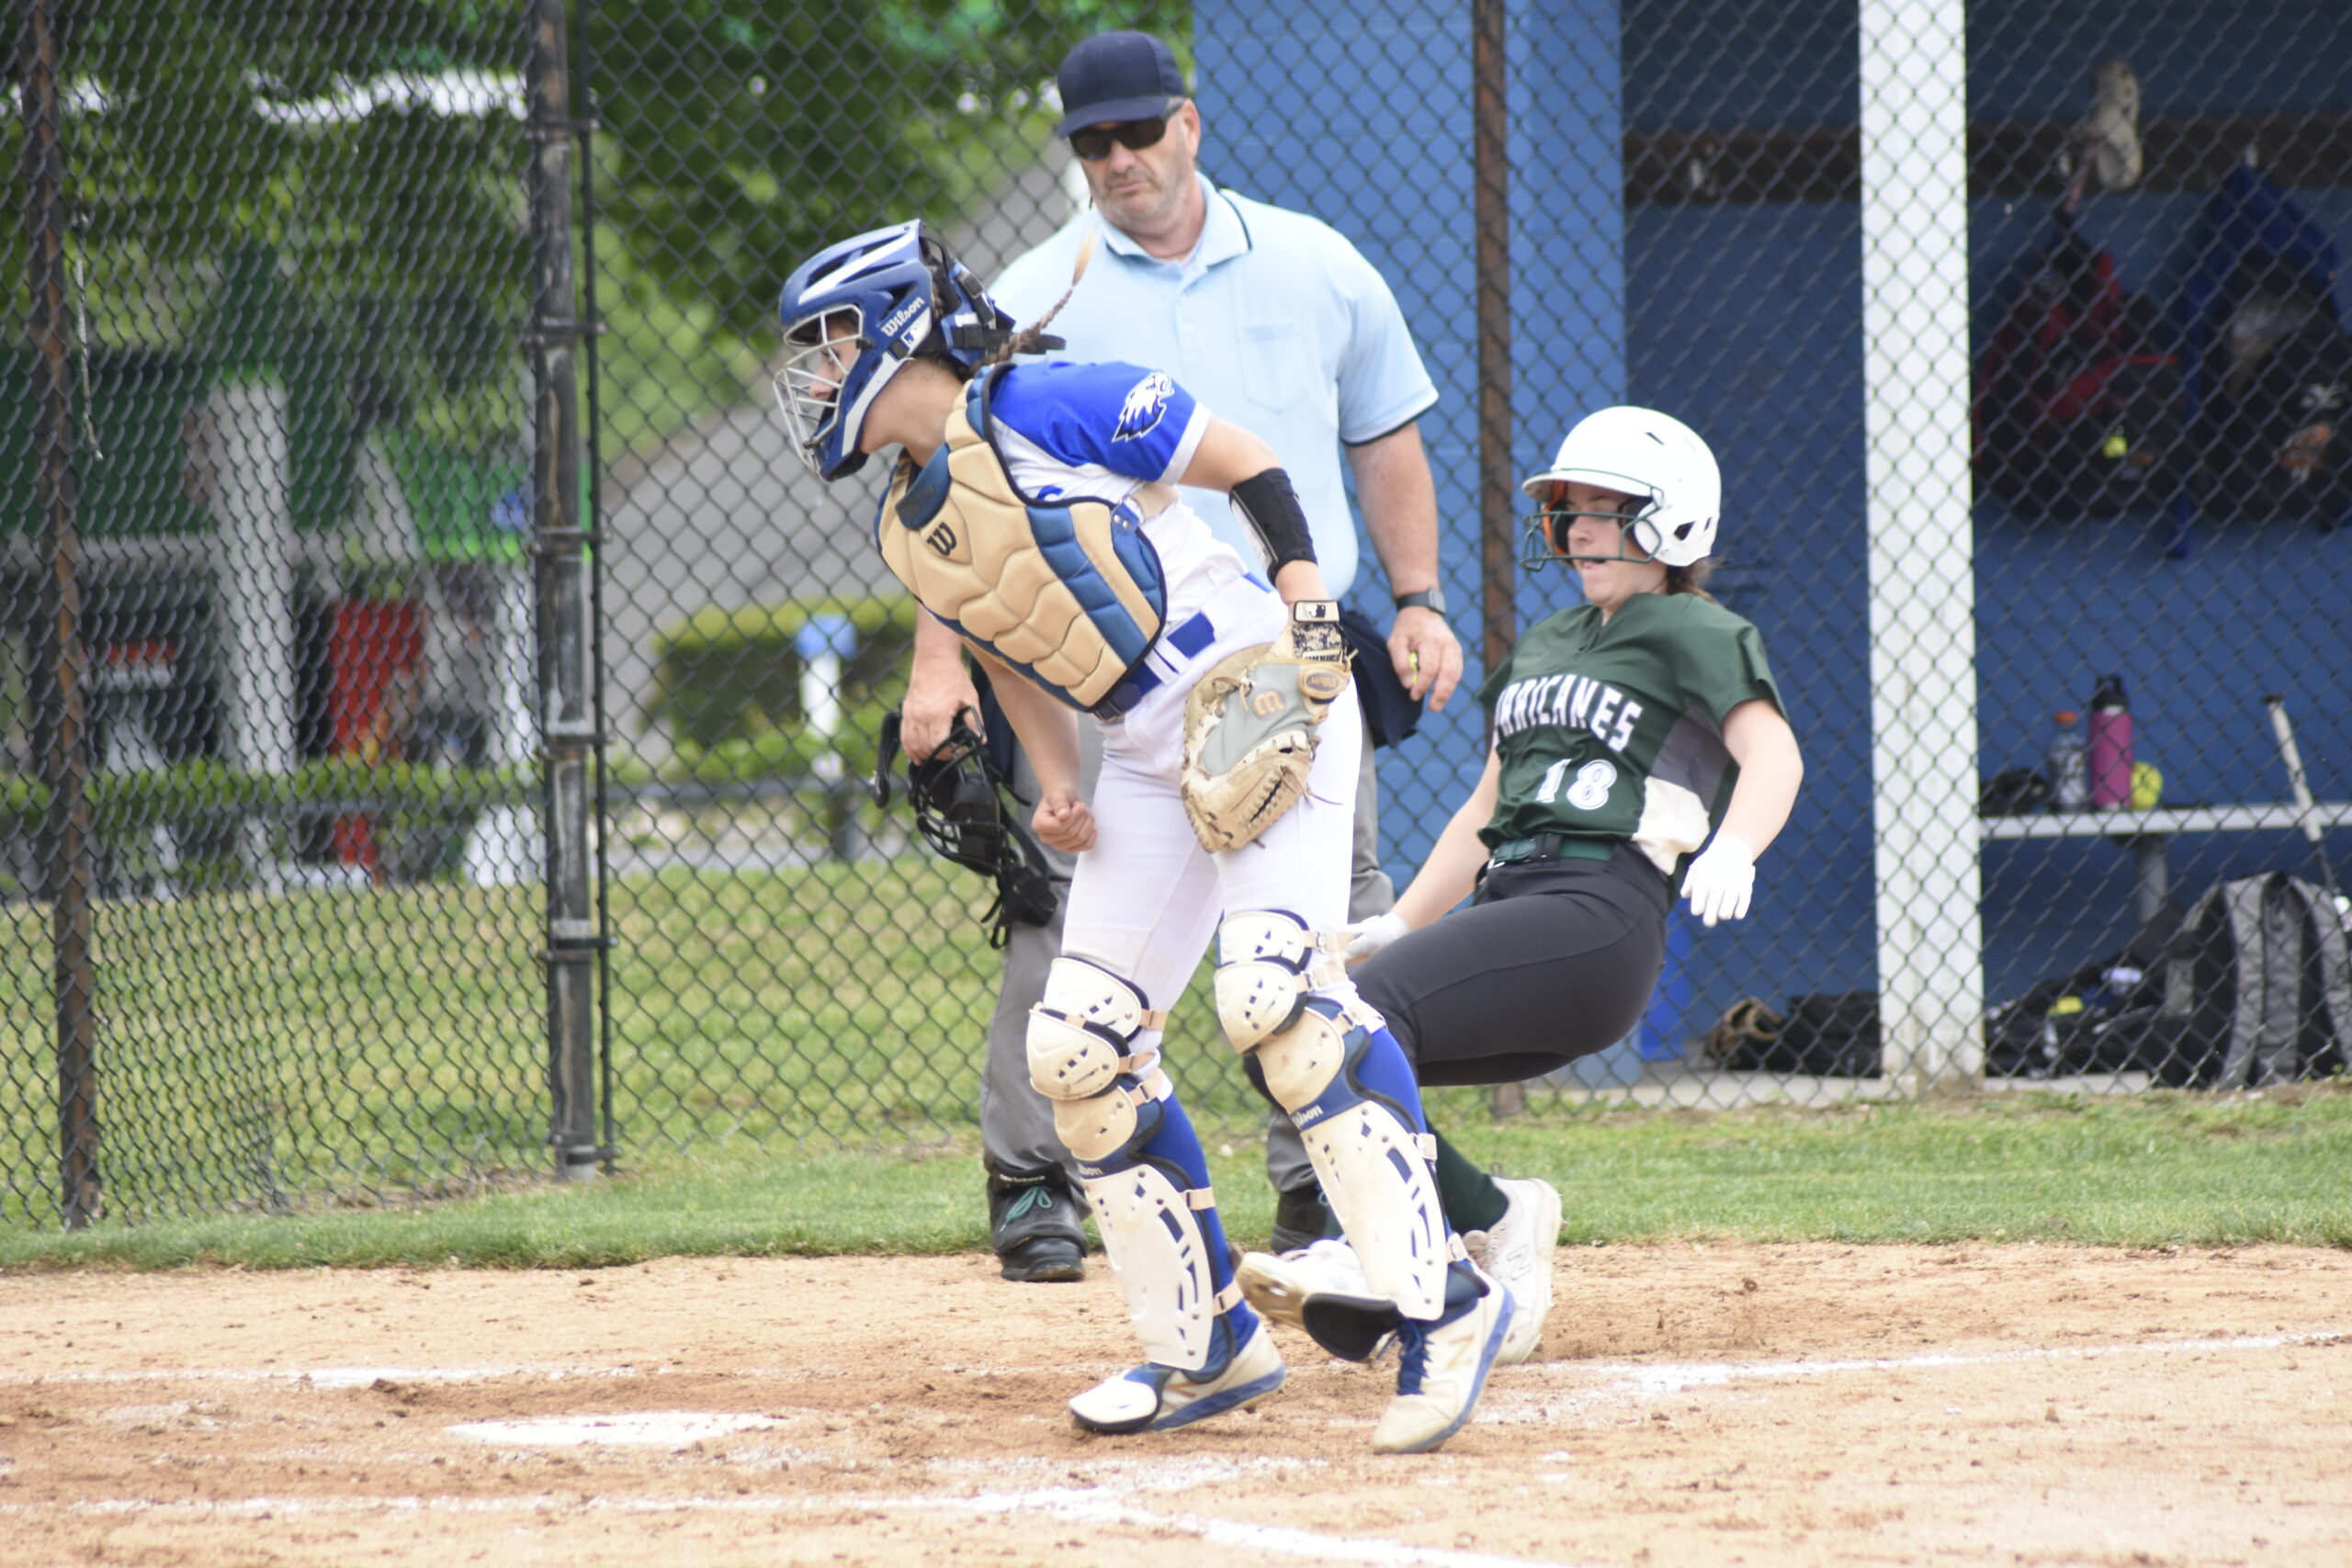 Kali Baumiller gets ready to slide at home plate for a Westhampton Beach run.   DREW BUDD